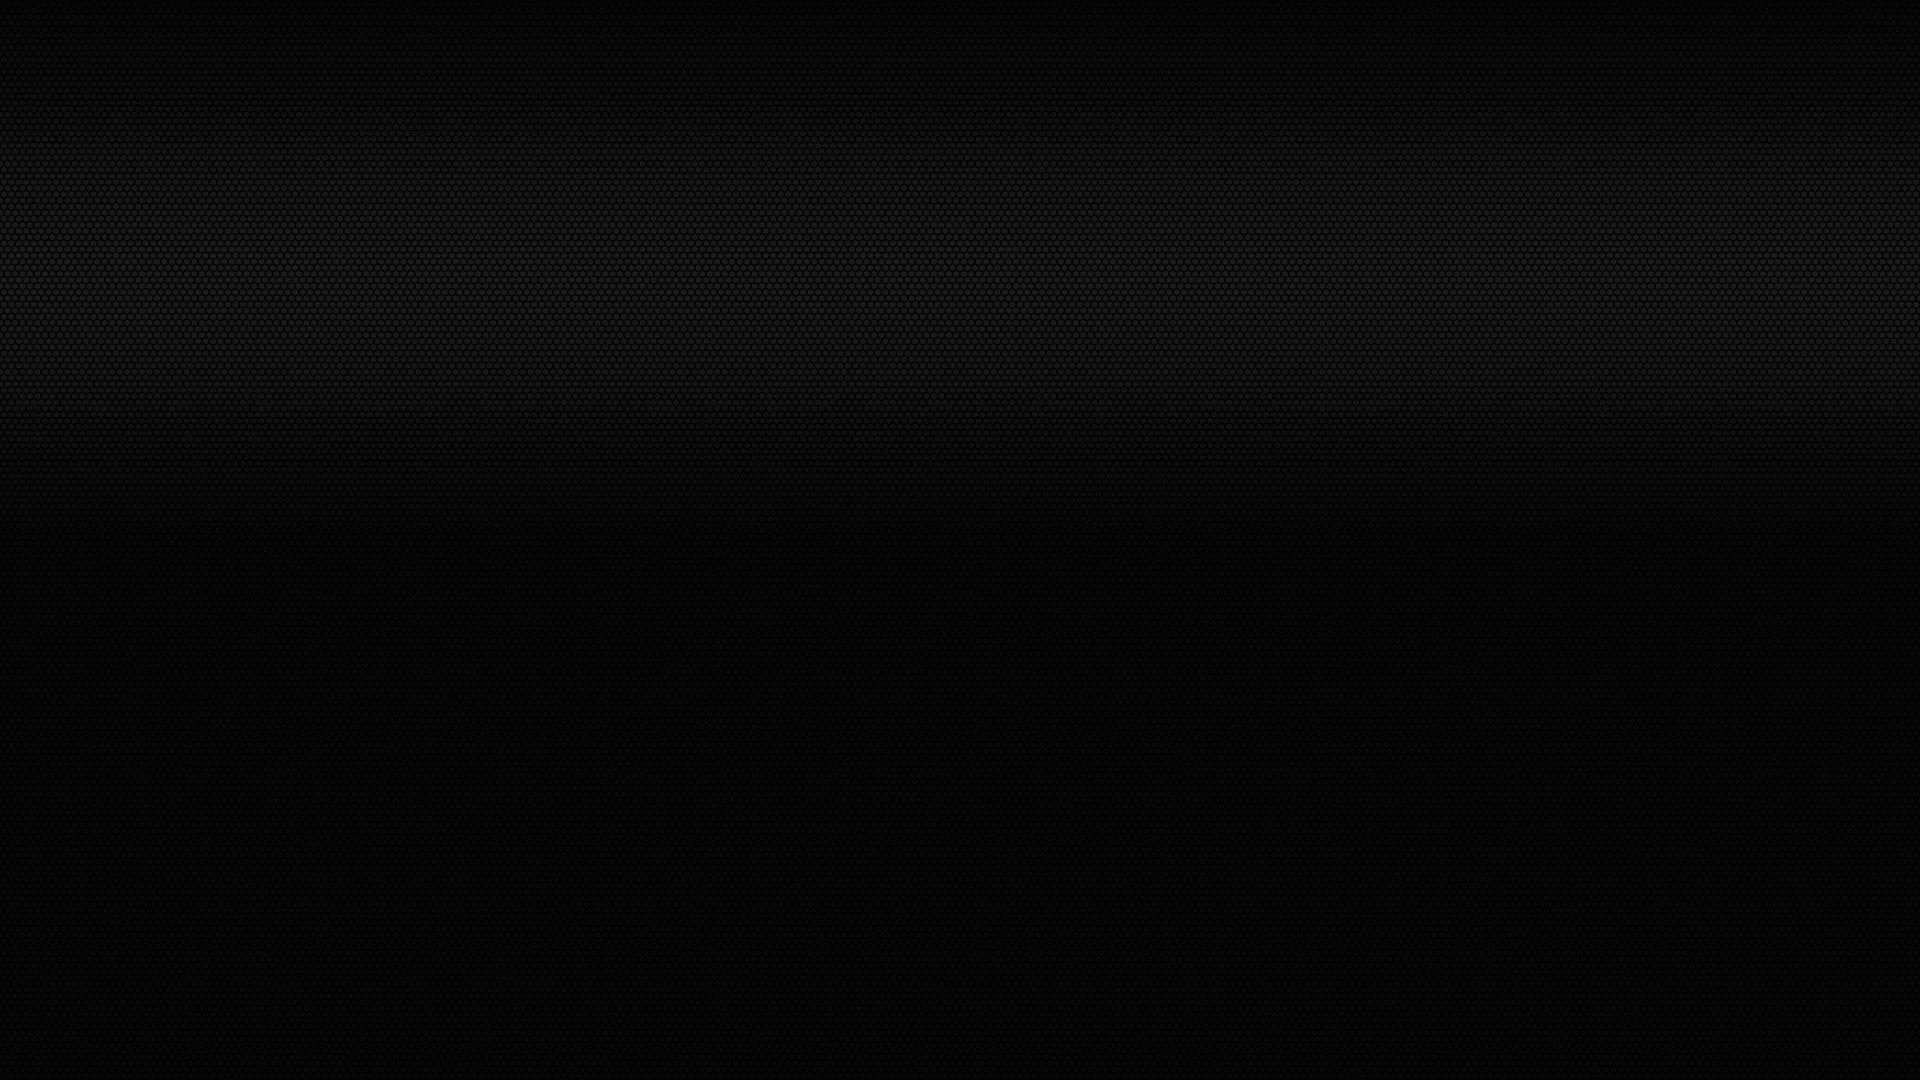 Pure Black Amoled Wallpaper 4K / Download And Share Awesome Cool